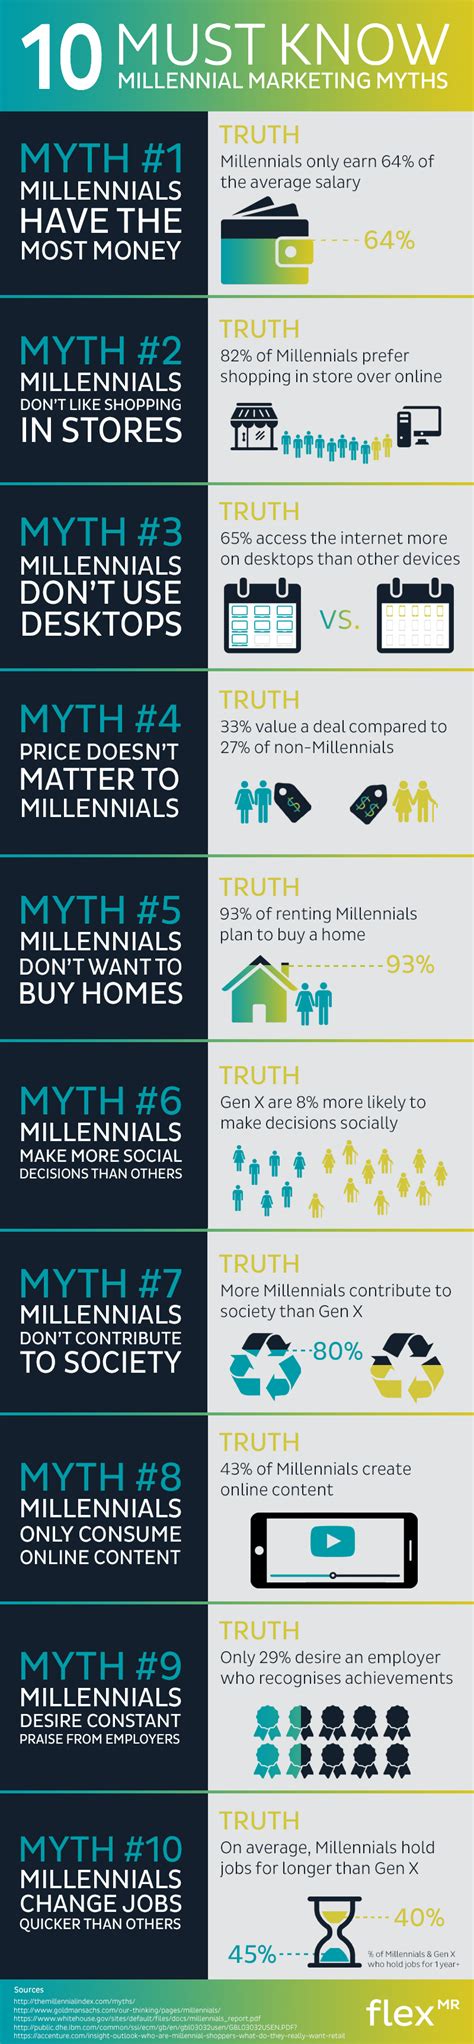 Infographic 10 Must Know Millennial Marketing Myths